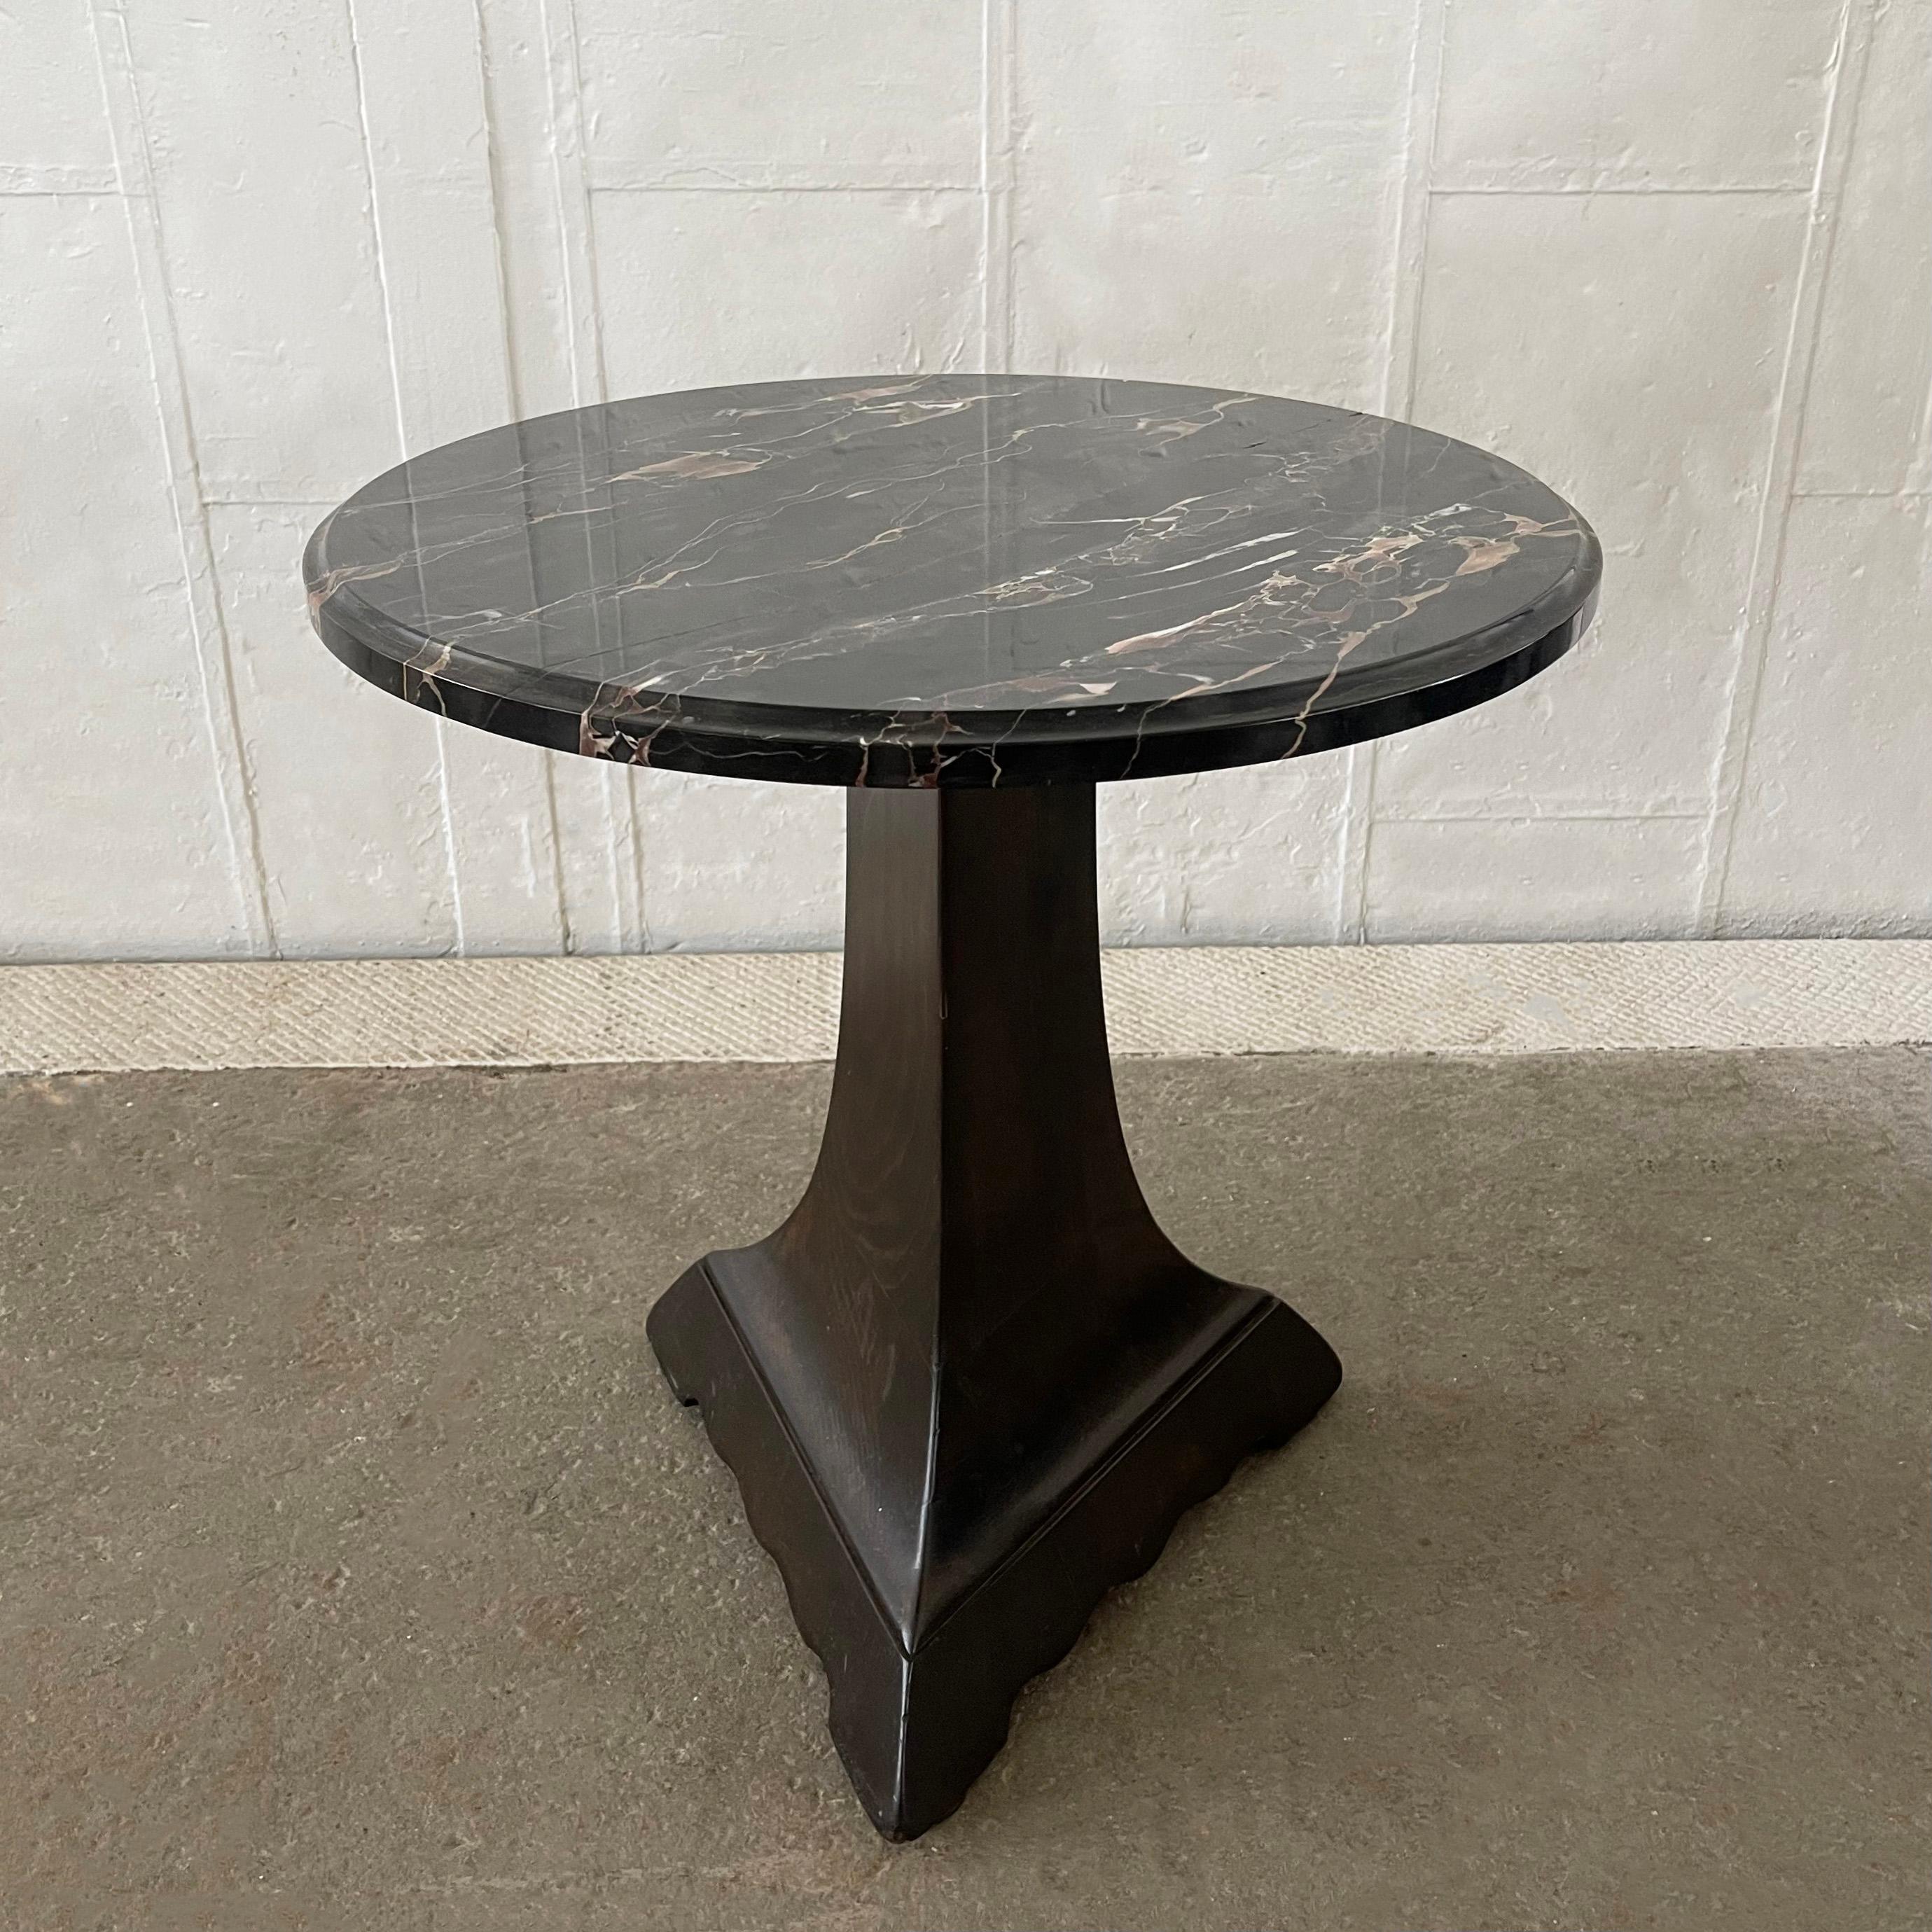 Charming, arts & crafts, occassional side table features a round black marble top with cove edge atop a lacquered triangular pedestal base with scalloped edge. 